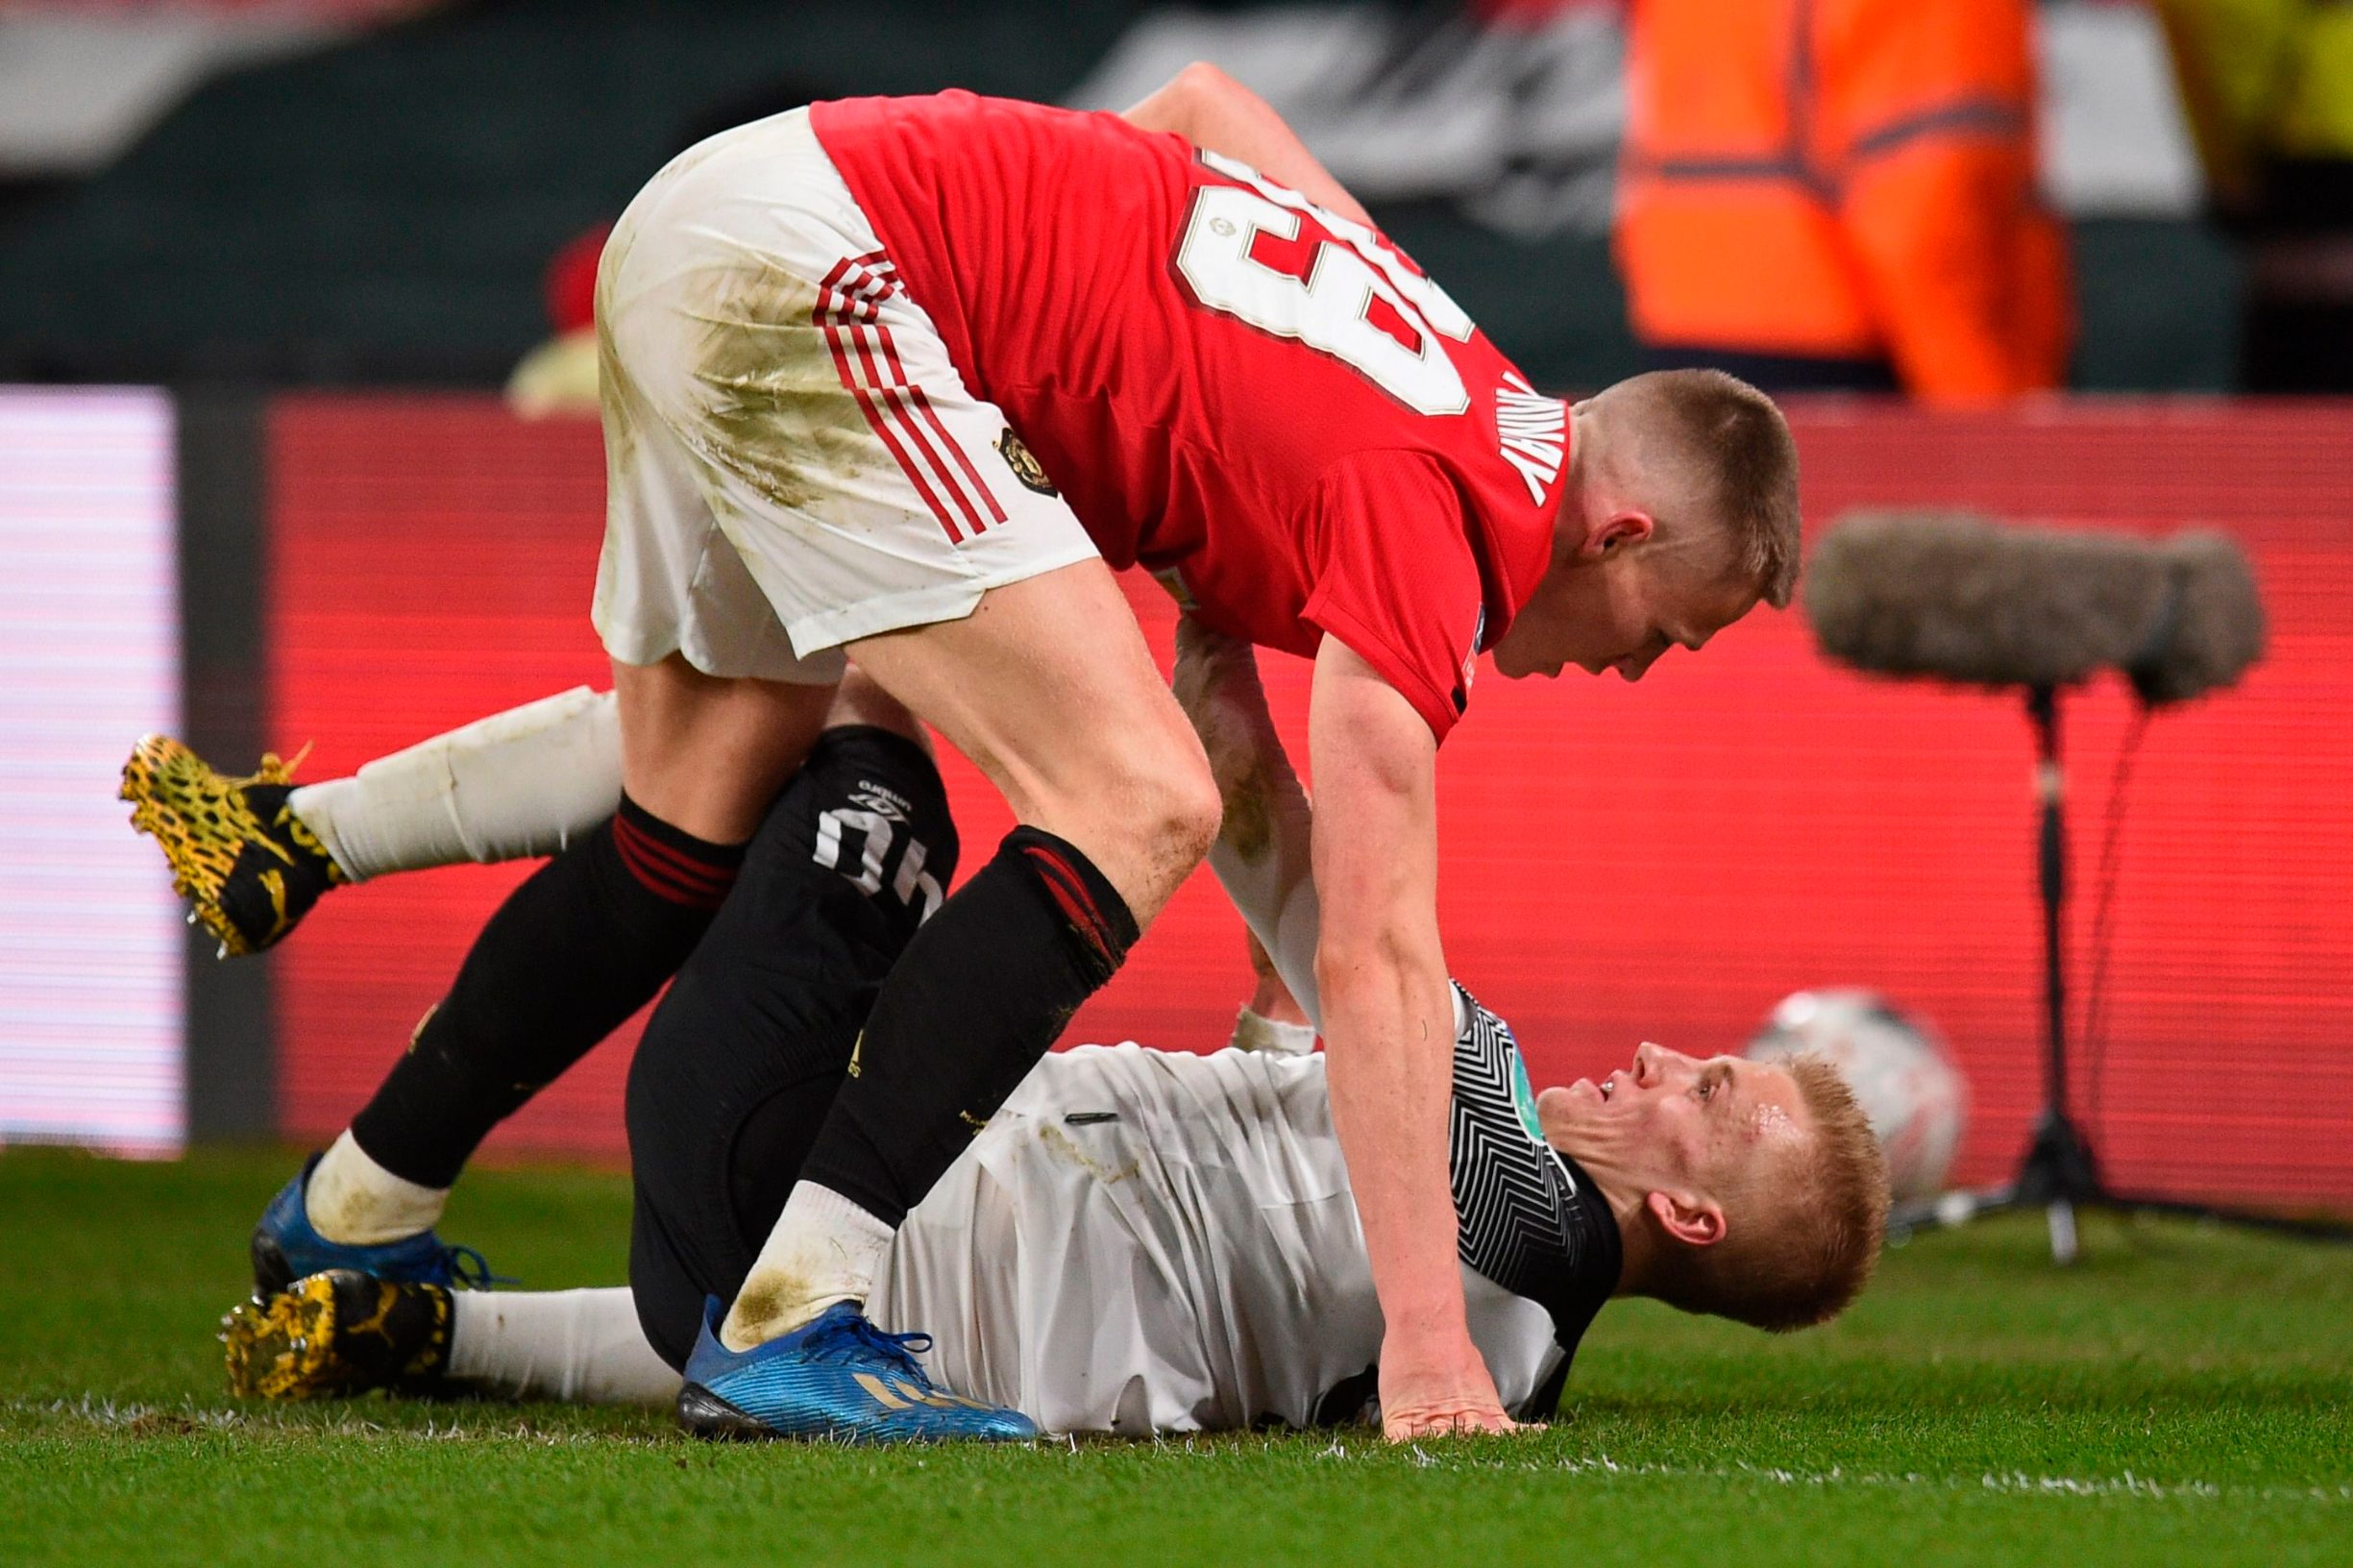 Manchester United's Scottish midfielder Scott McTominay (up) clashes with Derby County's English midfielder Louie Sibley during the English FA Cup fifth round football match between Derby County and Manchester United at Pride Park Stadium in Derby, central England on March 5, 2020. (Photo by Oli SCARFF / AFP) / RESTRICTED TO EDITORIAL USE. No use with unauthorized audio, video, data, fixture lists, club/league logos or 'live' services. Online in-match use limited to 120 images. An additional 40 images may be used in extra time. No video emulation. Social media in-match use limited to 120 images. An additional 40 images may be used in extra time. No use in betting publications, games or single club/league/player publications. / 